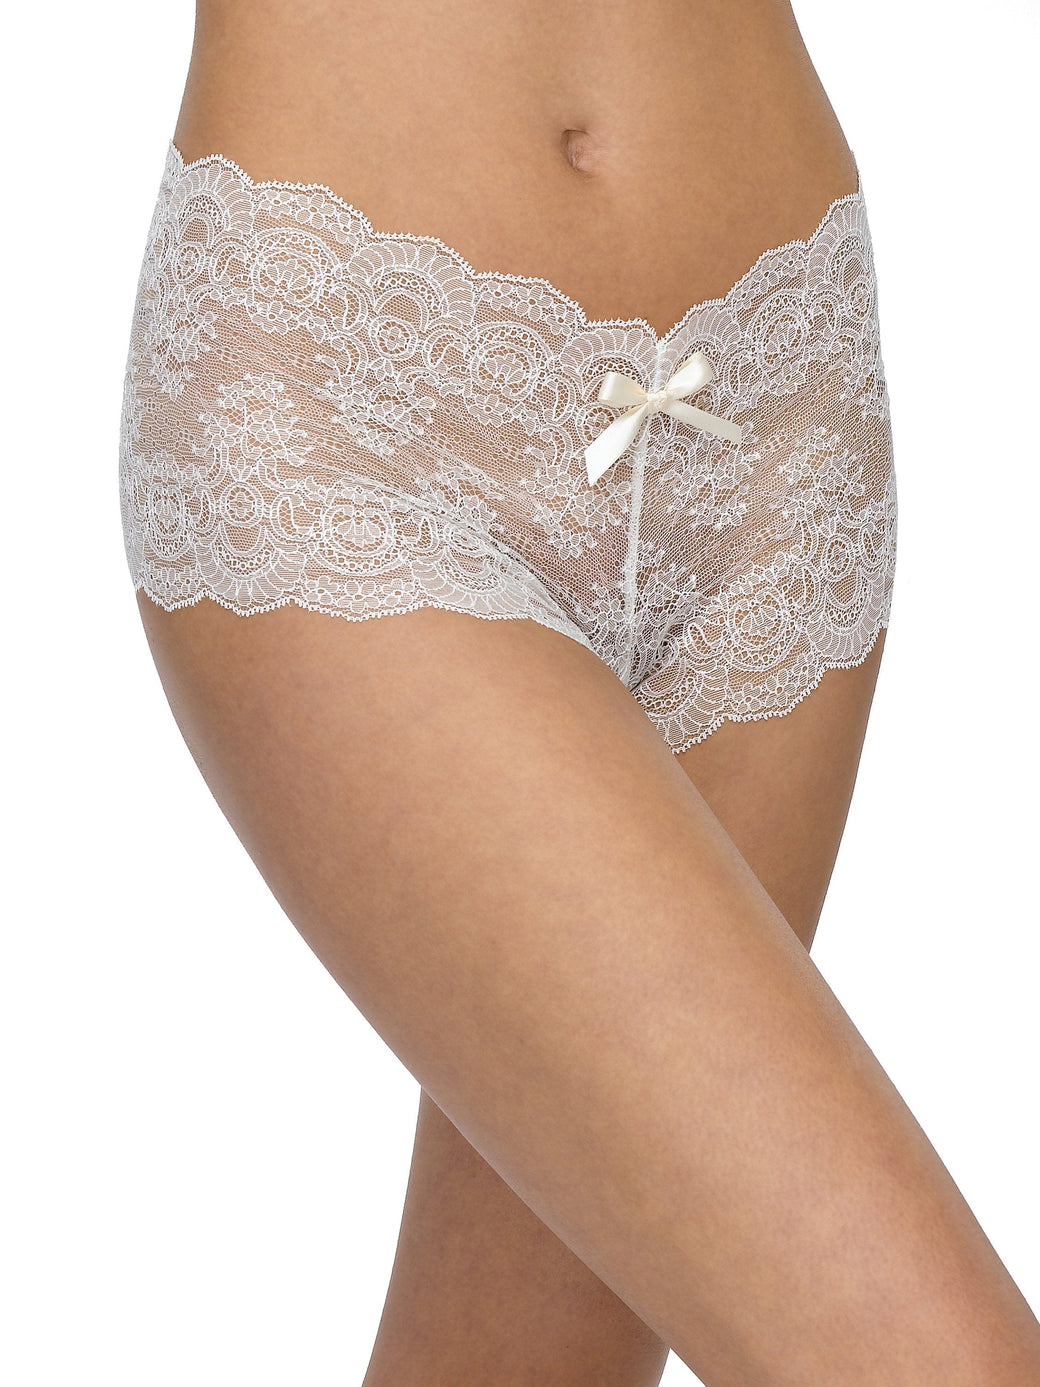 Luxe Lace Crotchless Brief See-Through Ivory White